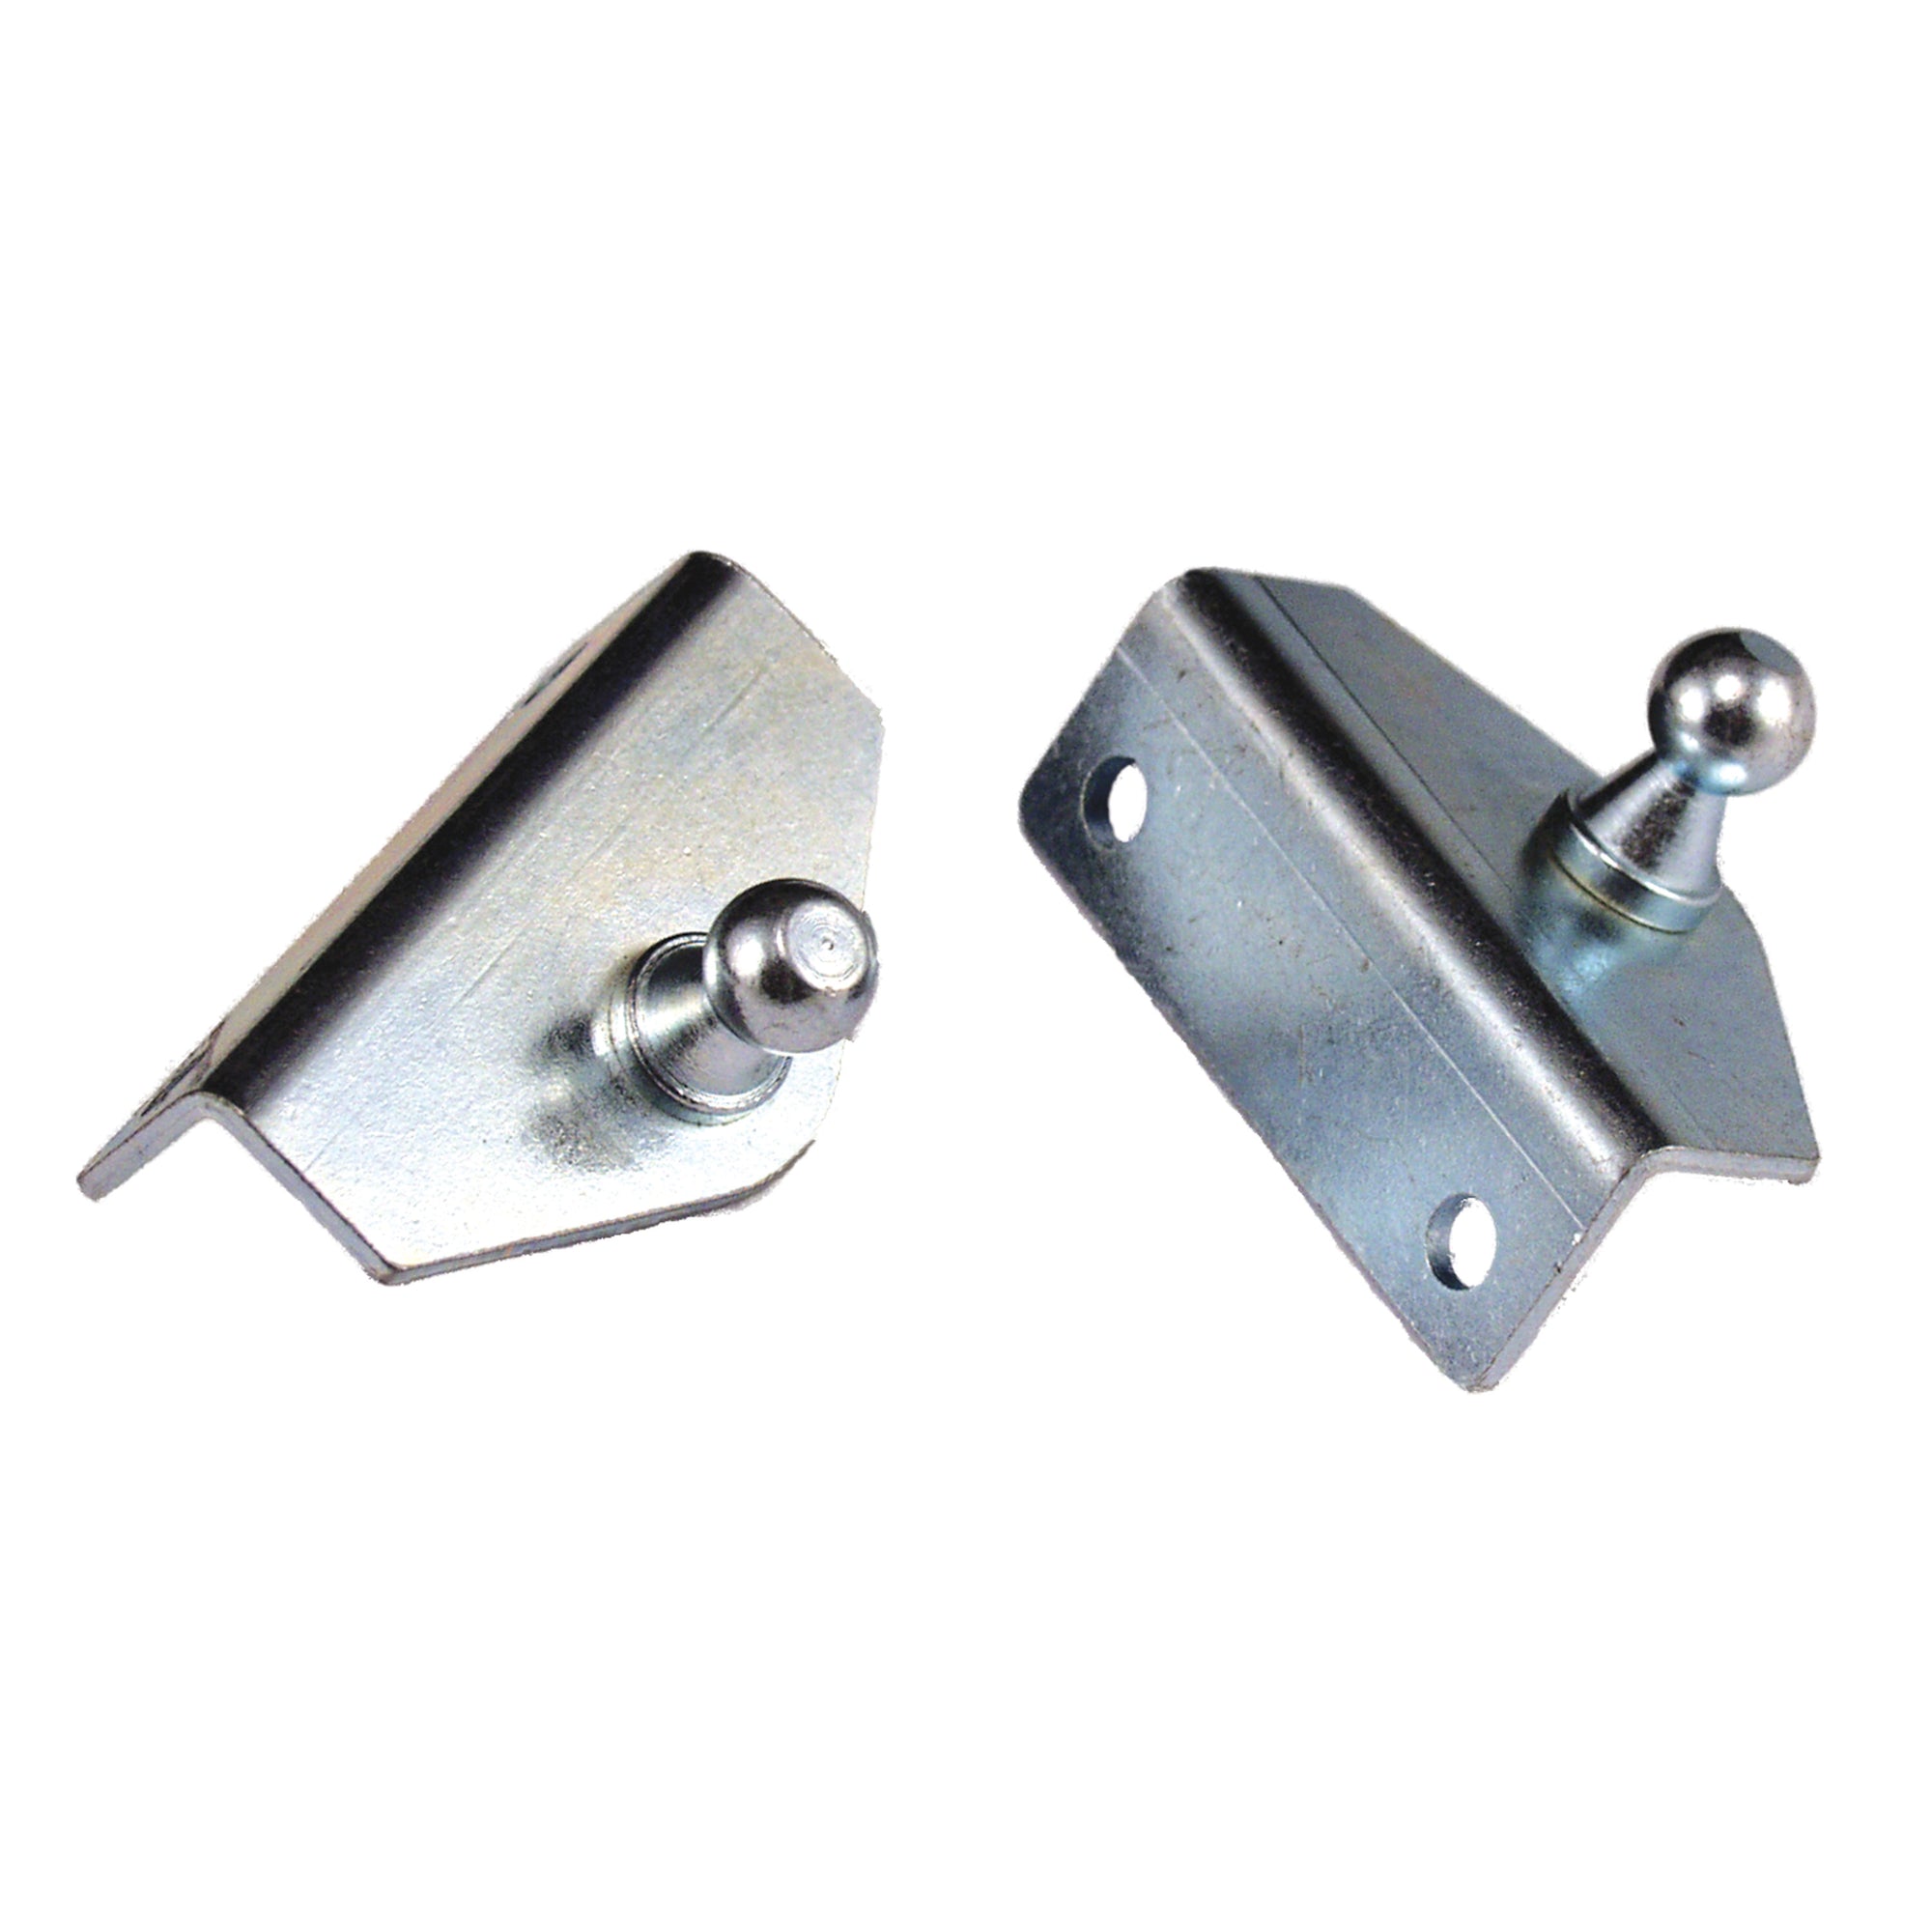 JR Products BR-1015 Gas Spring Mounting Bracket - Angled, Pack of 2